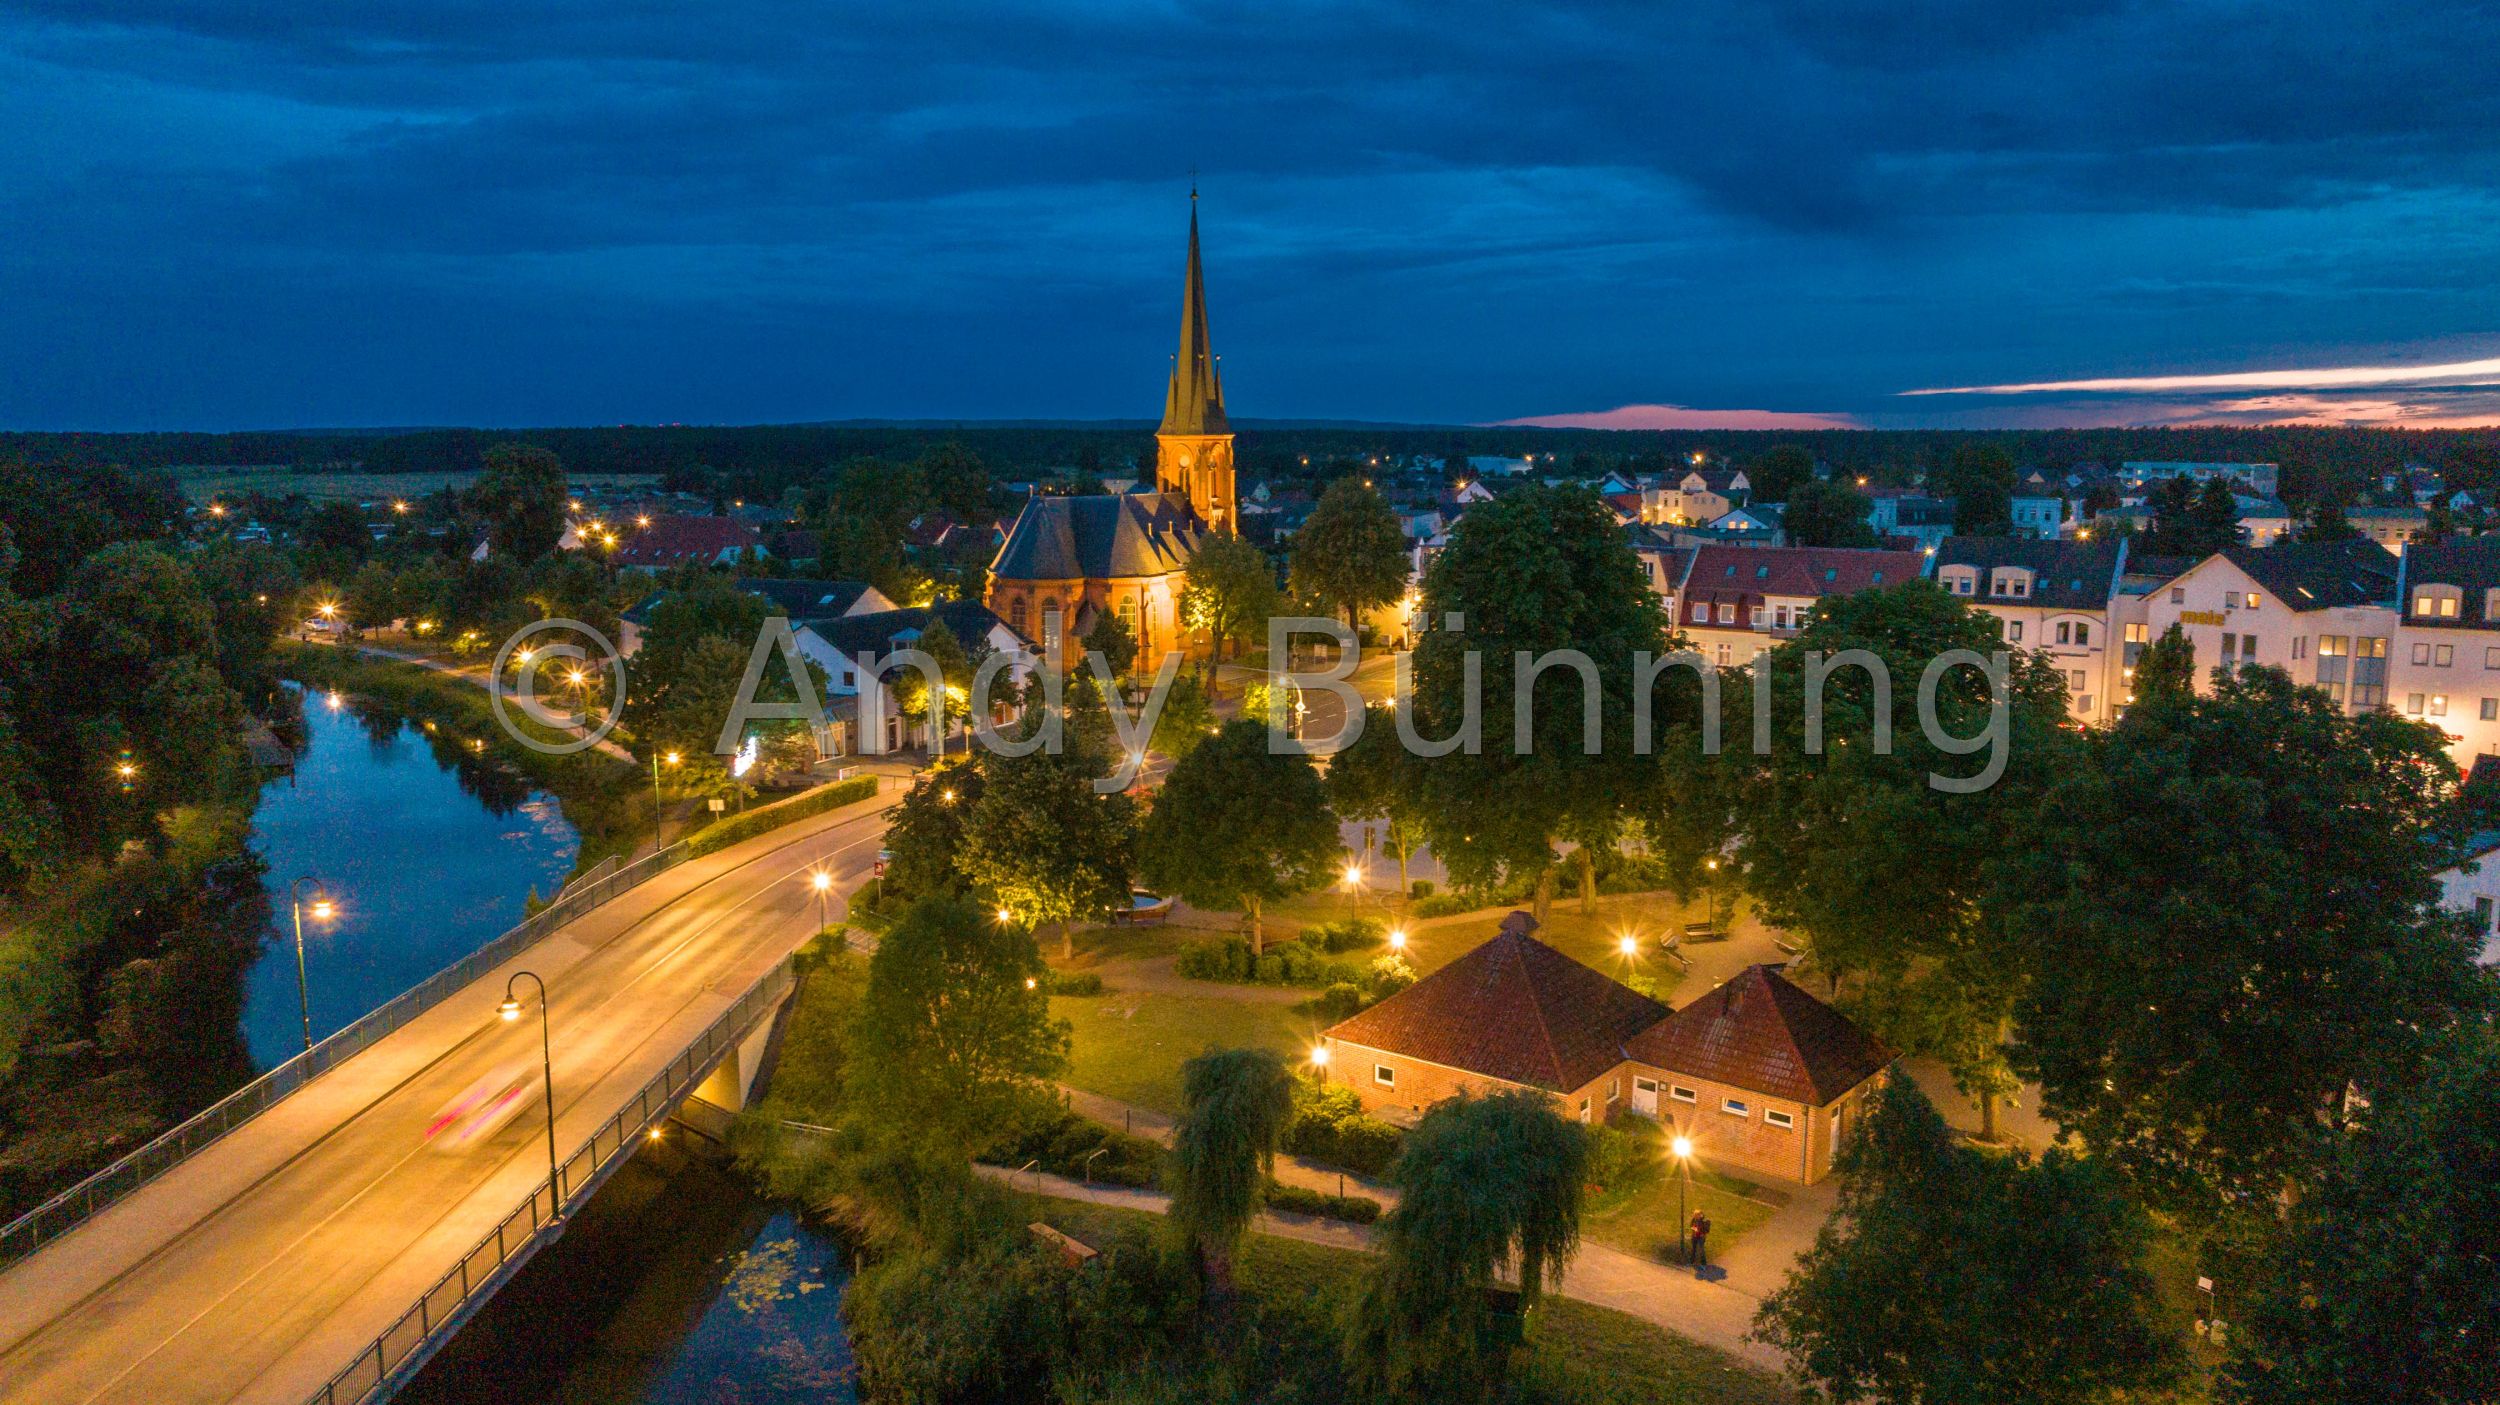 Preview ab230717_Torgelow-Abends_0017.jpg